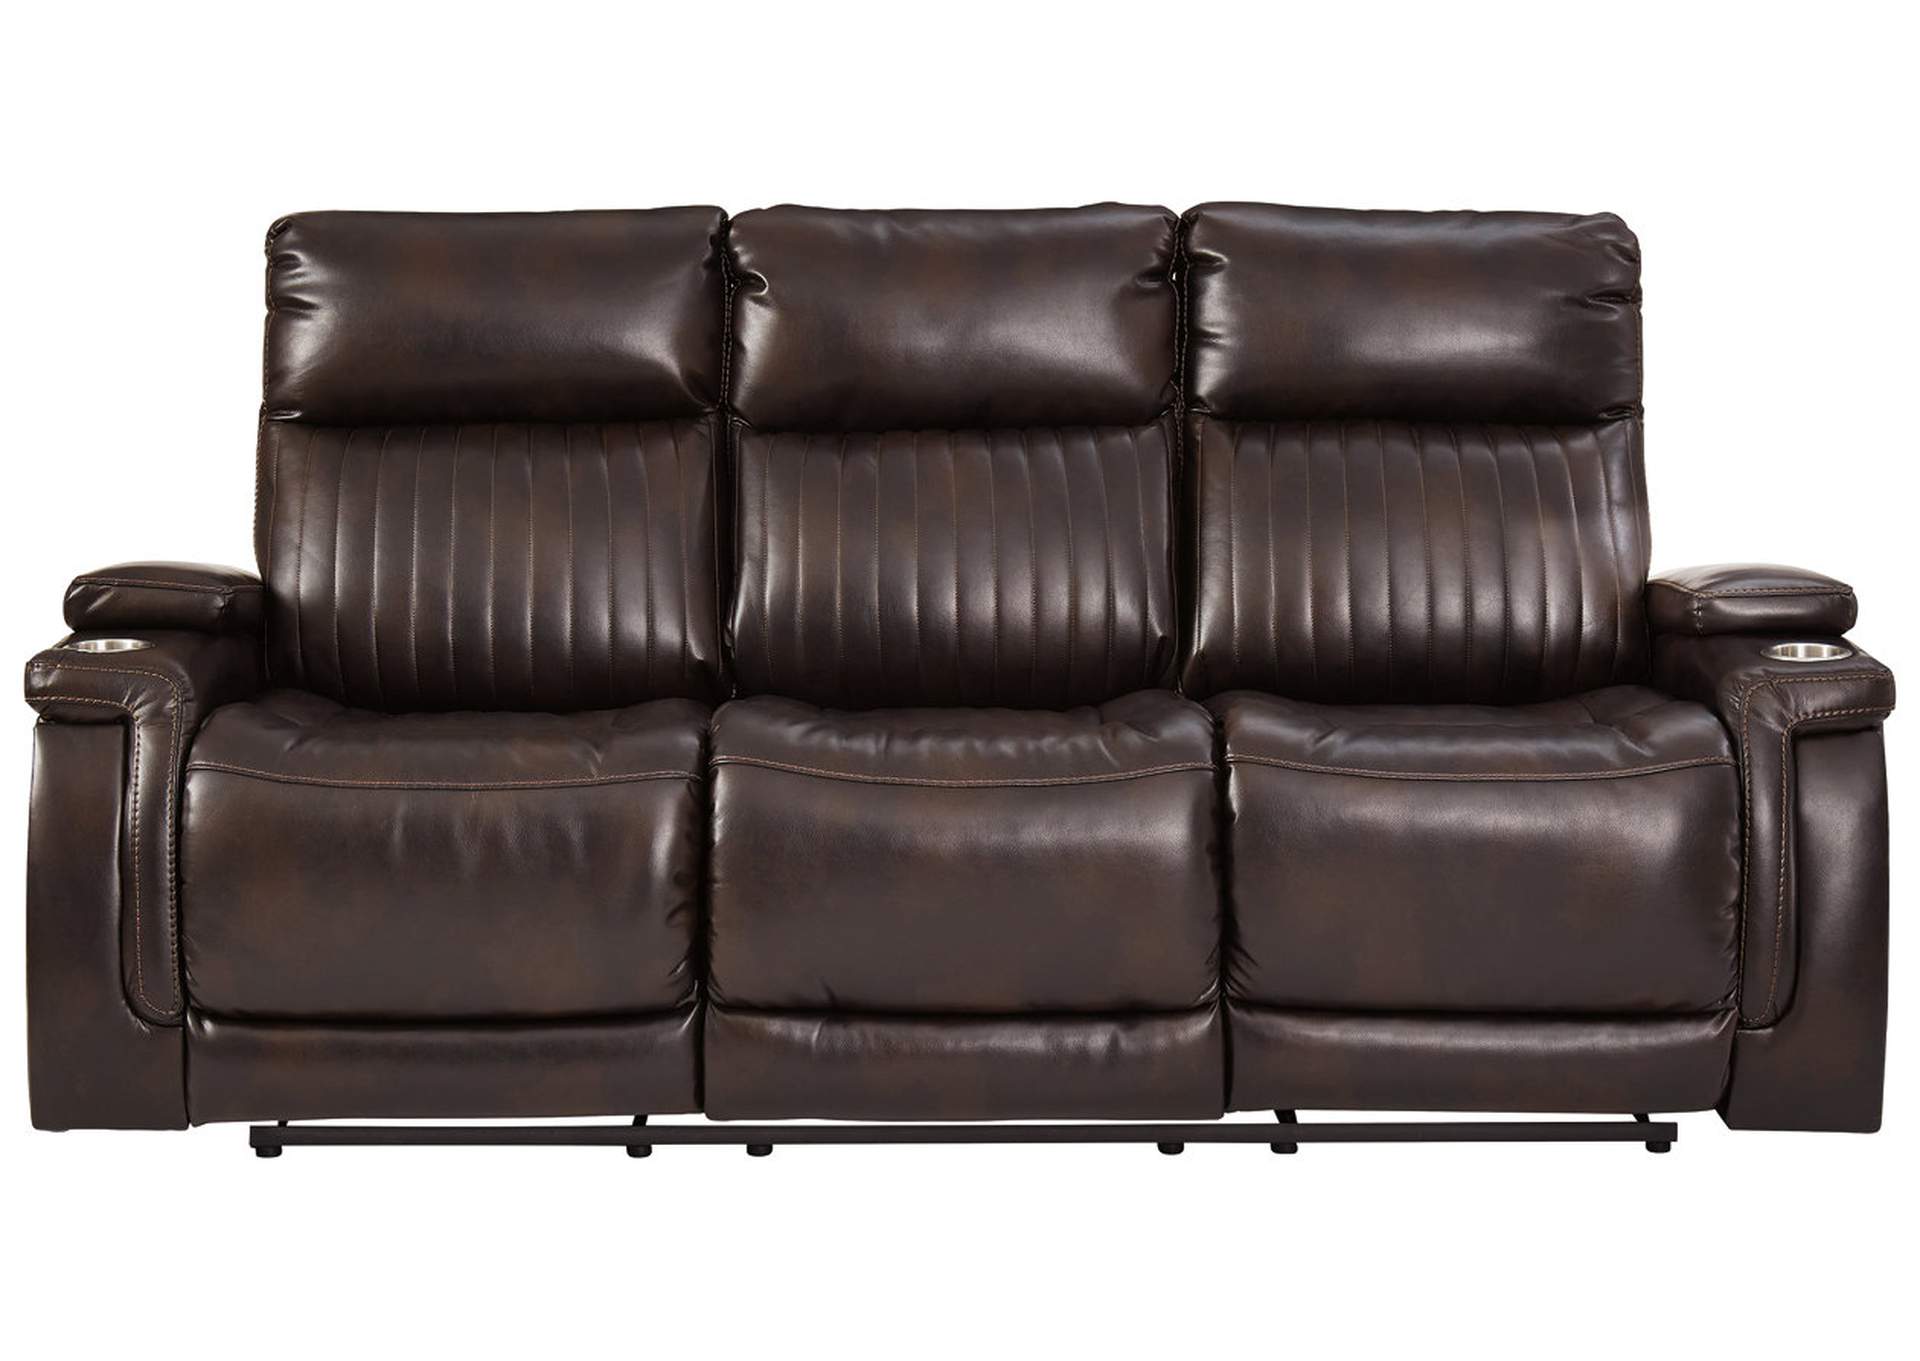 Team Time Power Reclining Sofa,Signature Design By Ashley